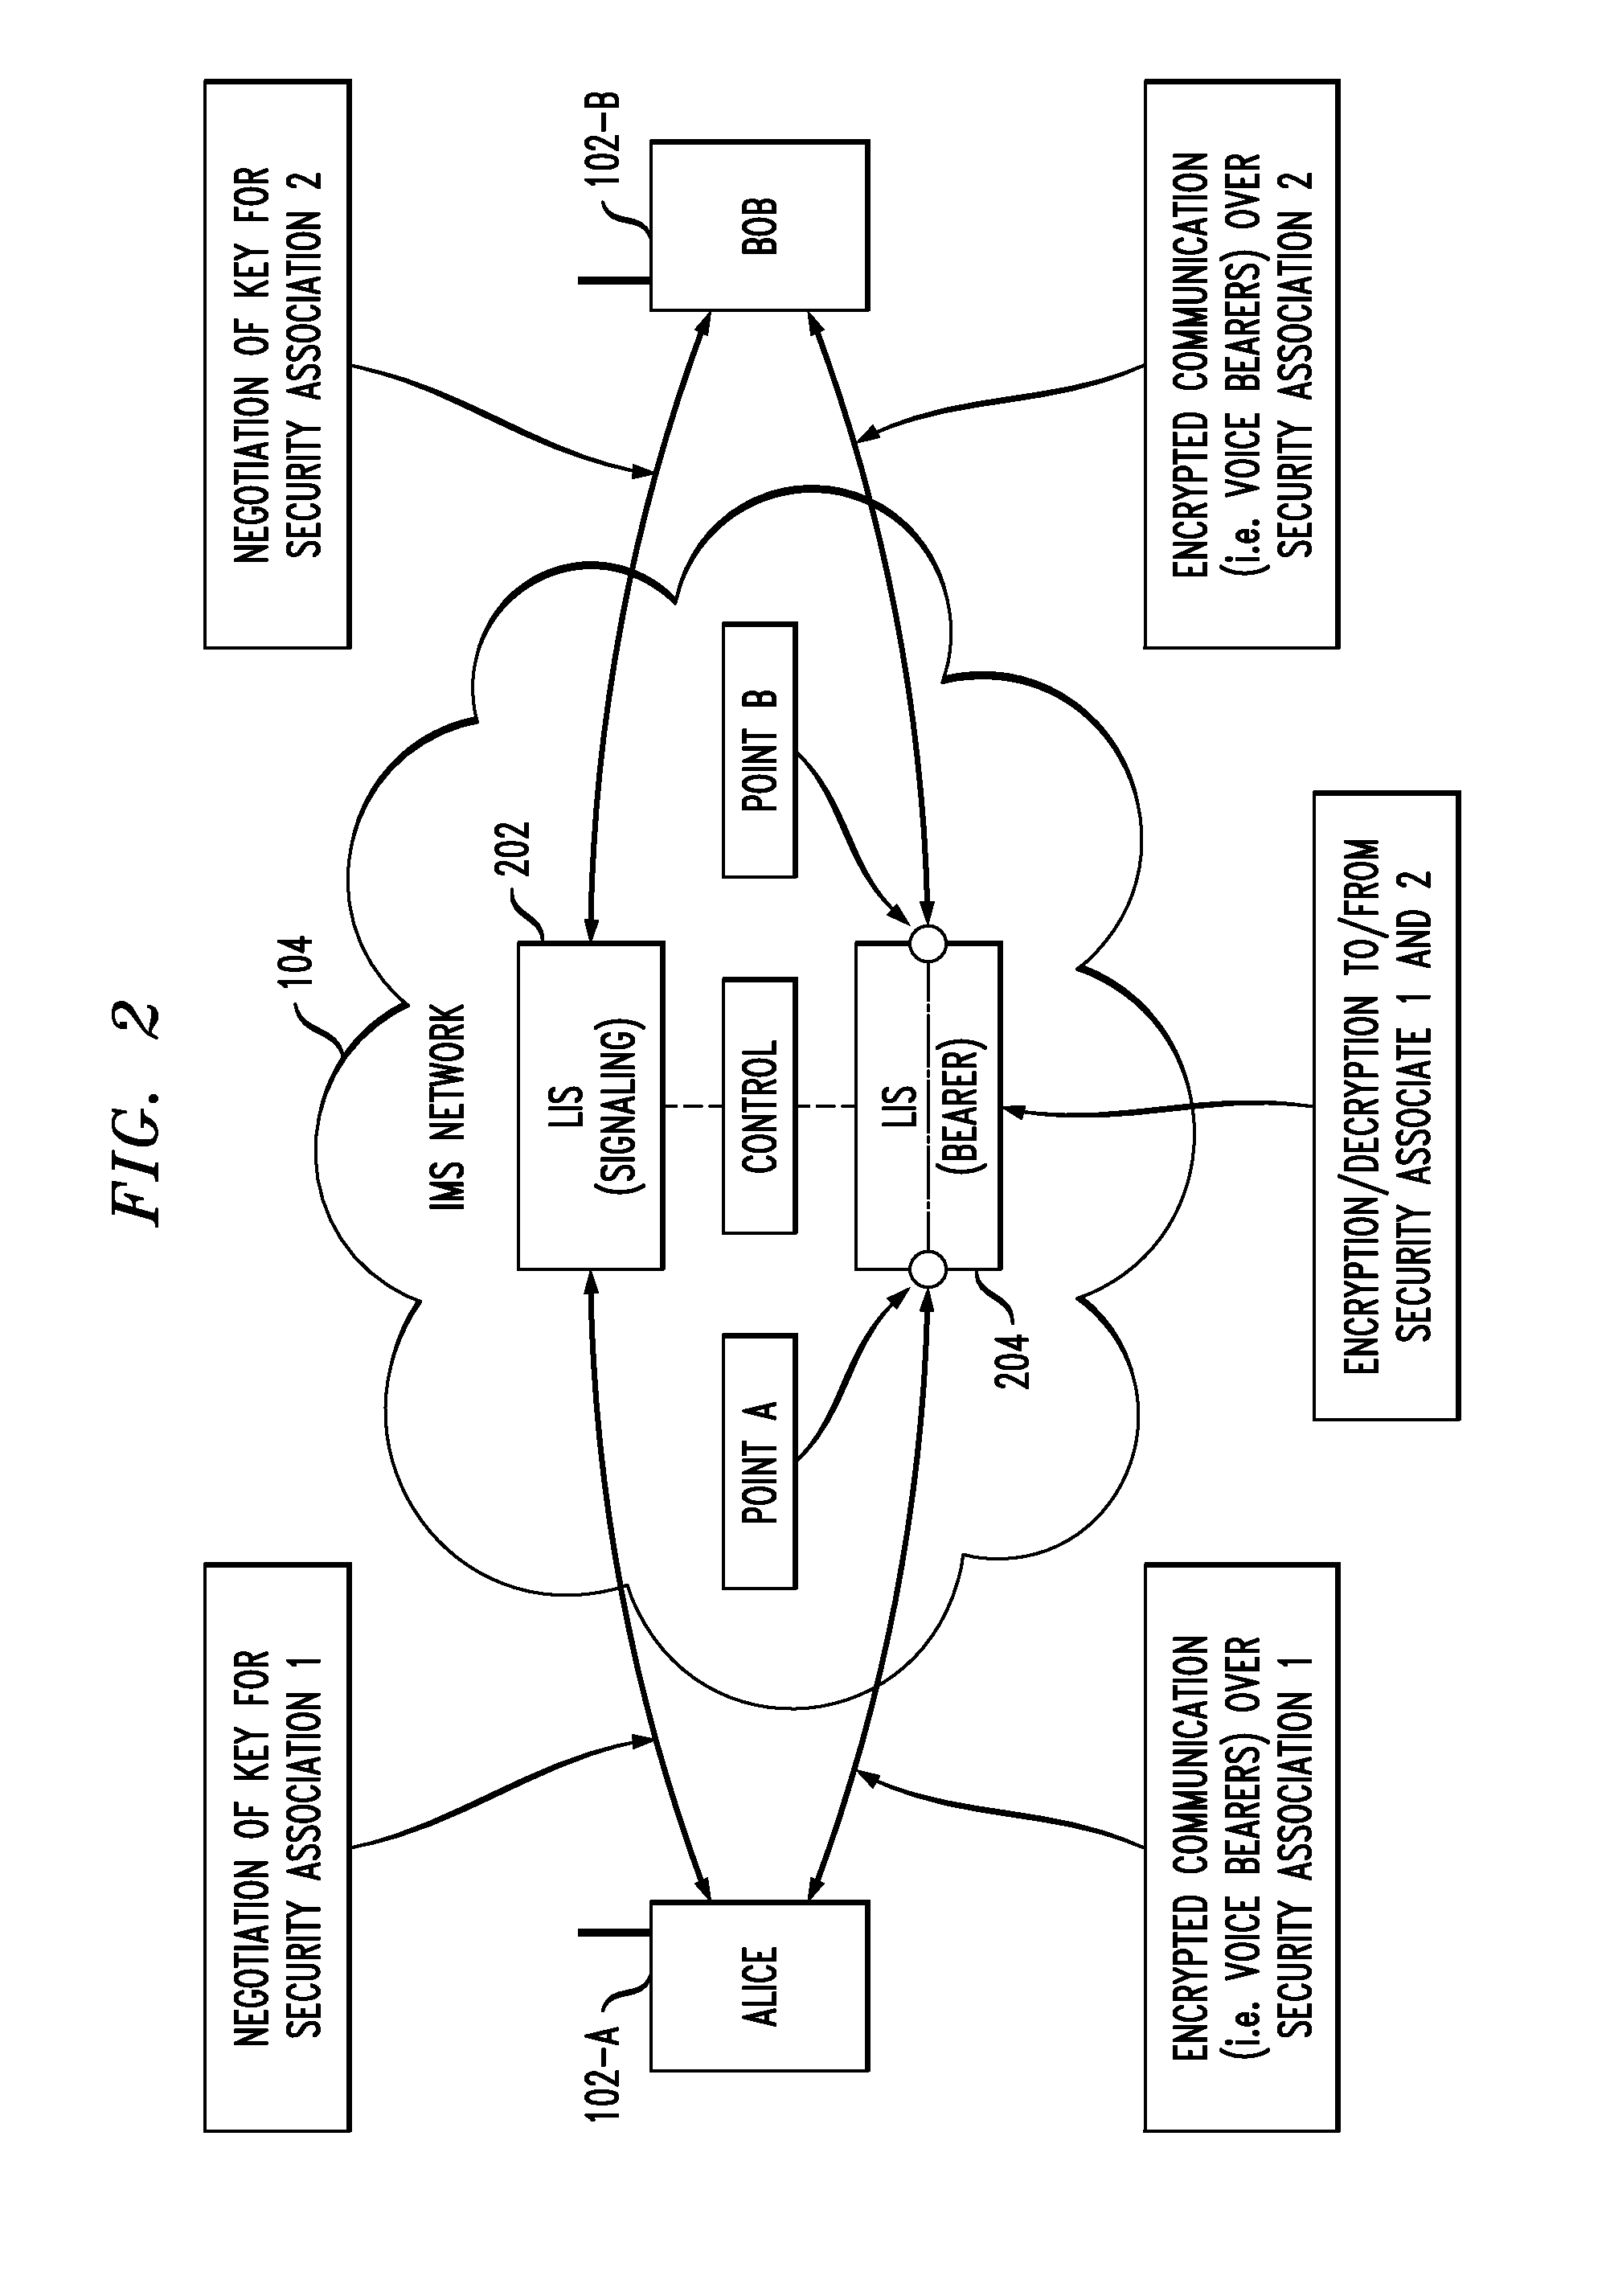 Policy routing-based lawful interception in communication system with end-to-end encryption